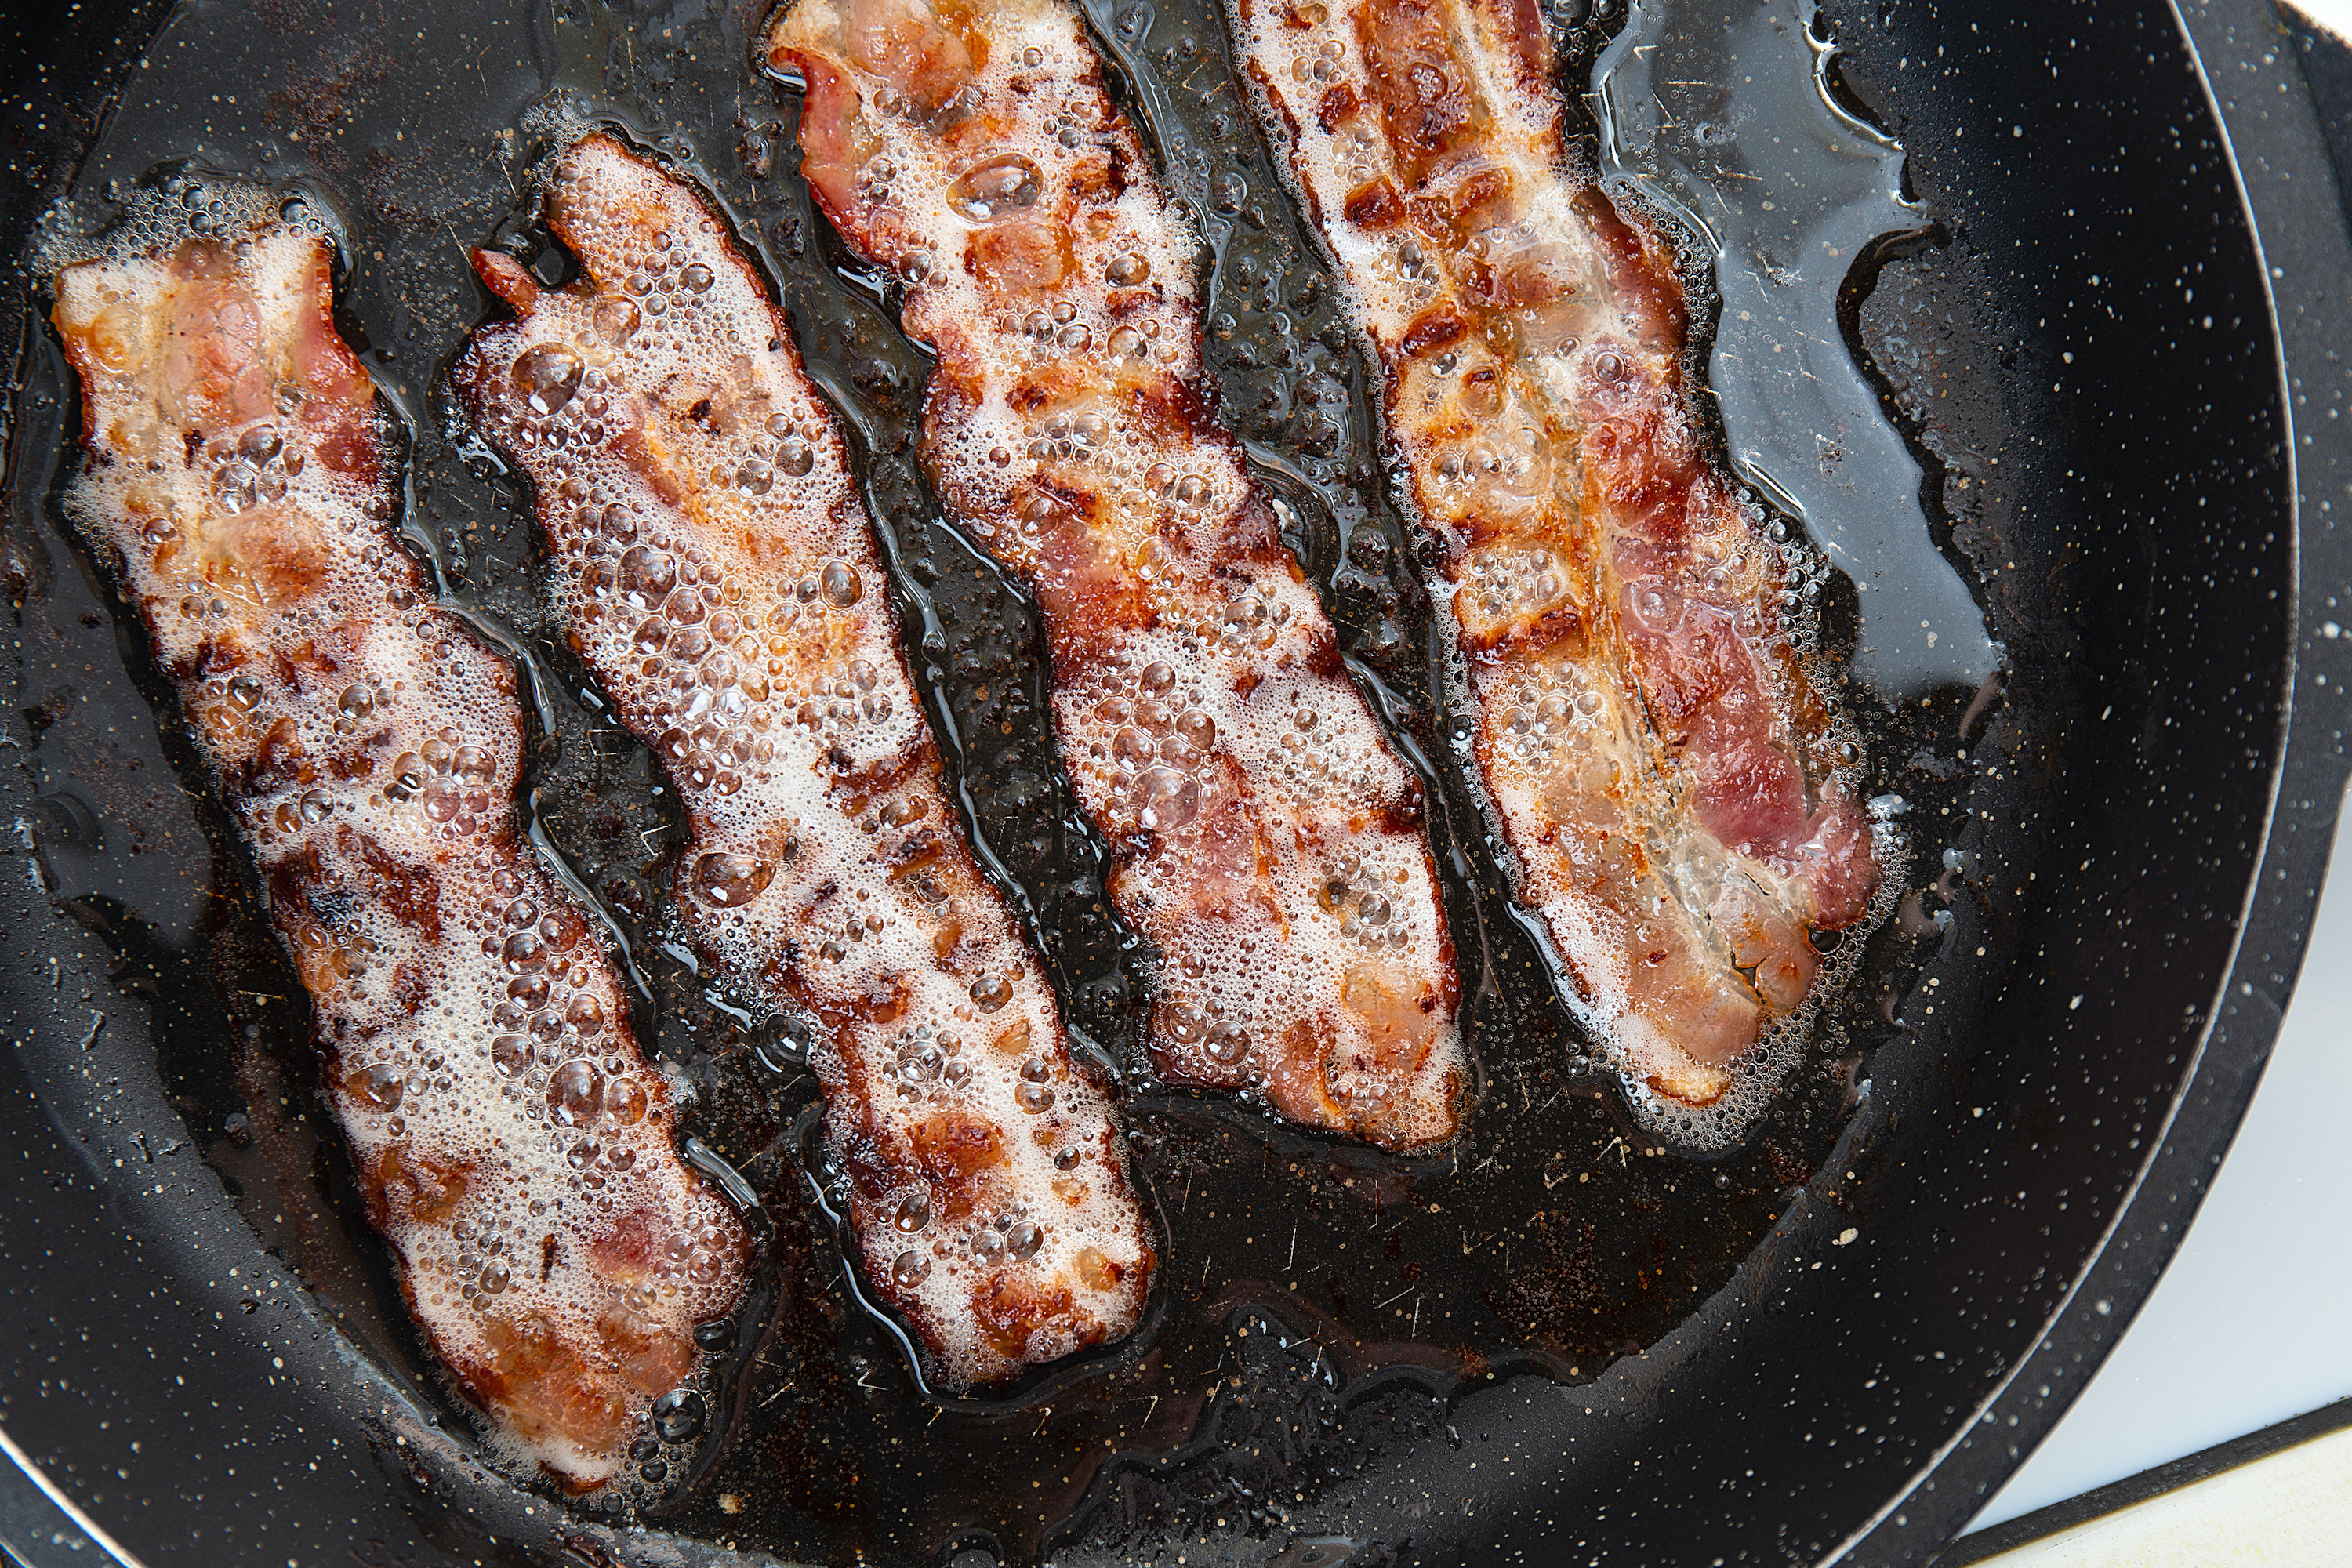 Bacon Grease Uses: A Home Cook's Guide to Bacon Fat